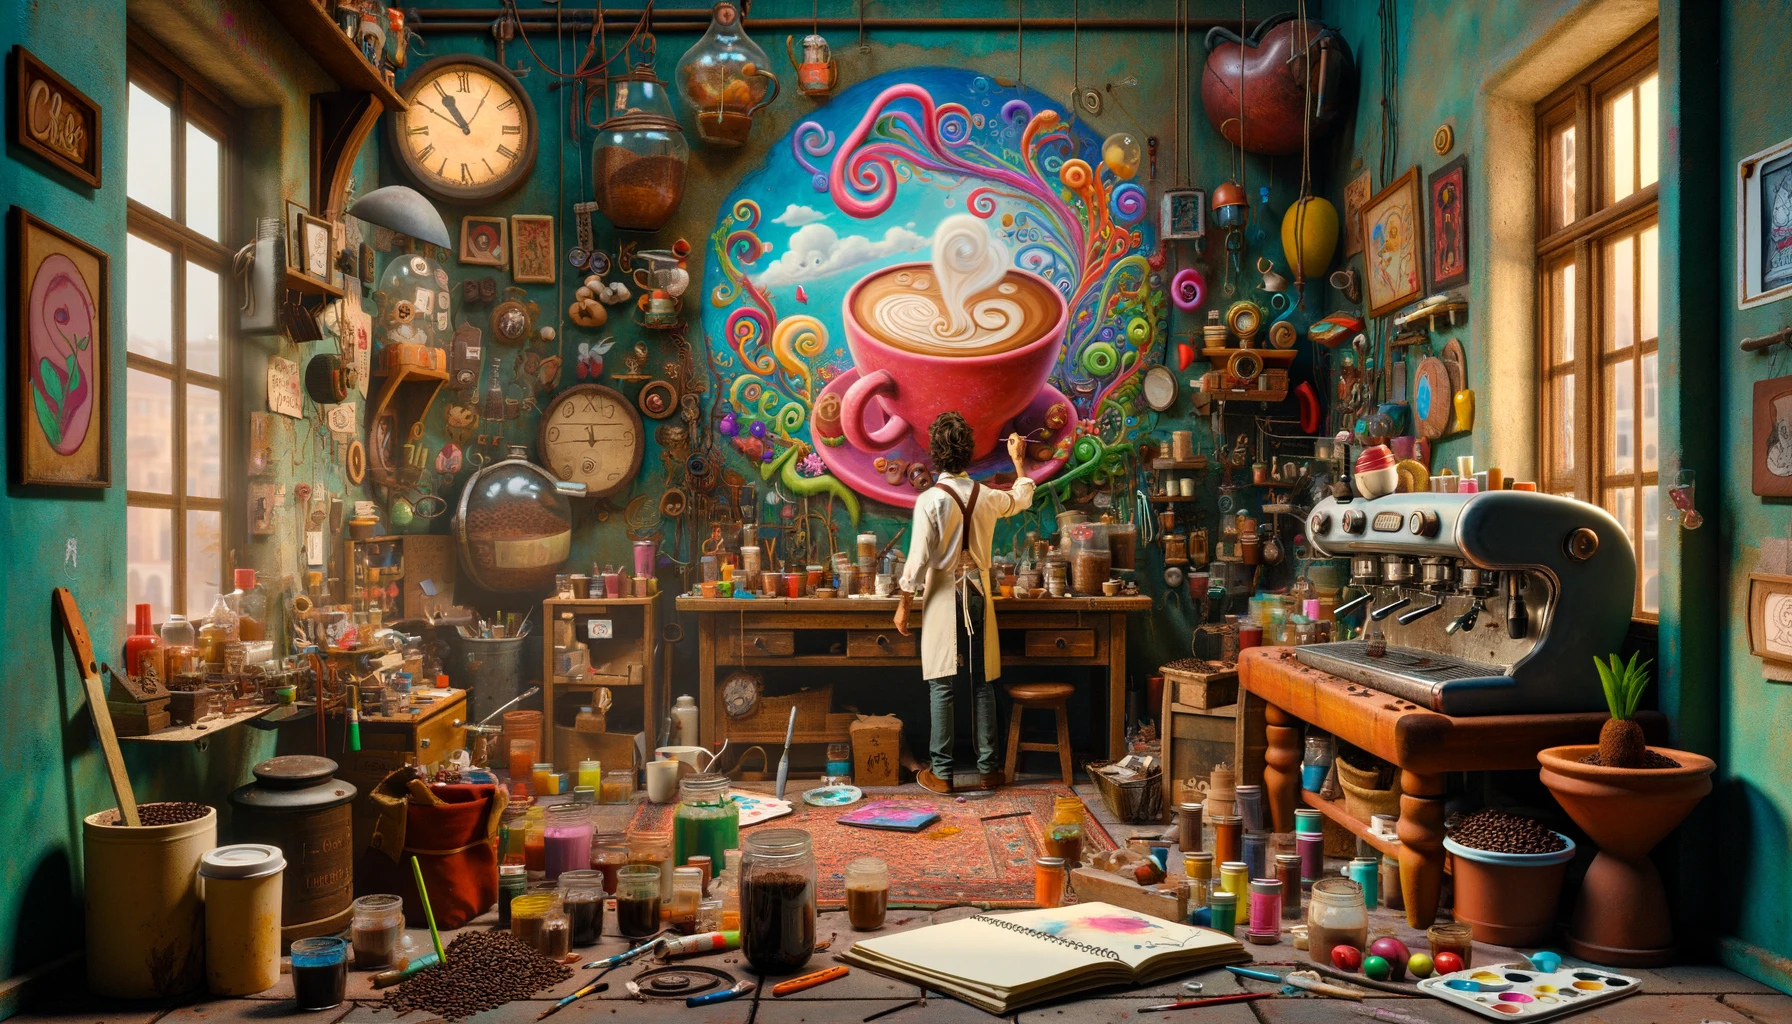 the quirky secret life of a coffee artist barista in a whimsical, hidden workshop